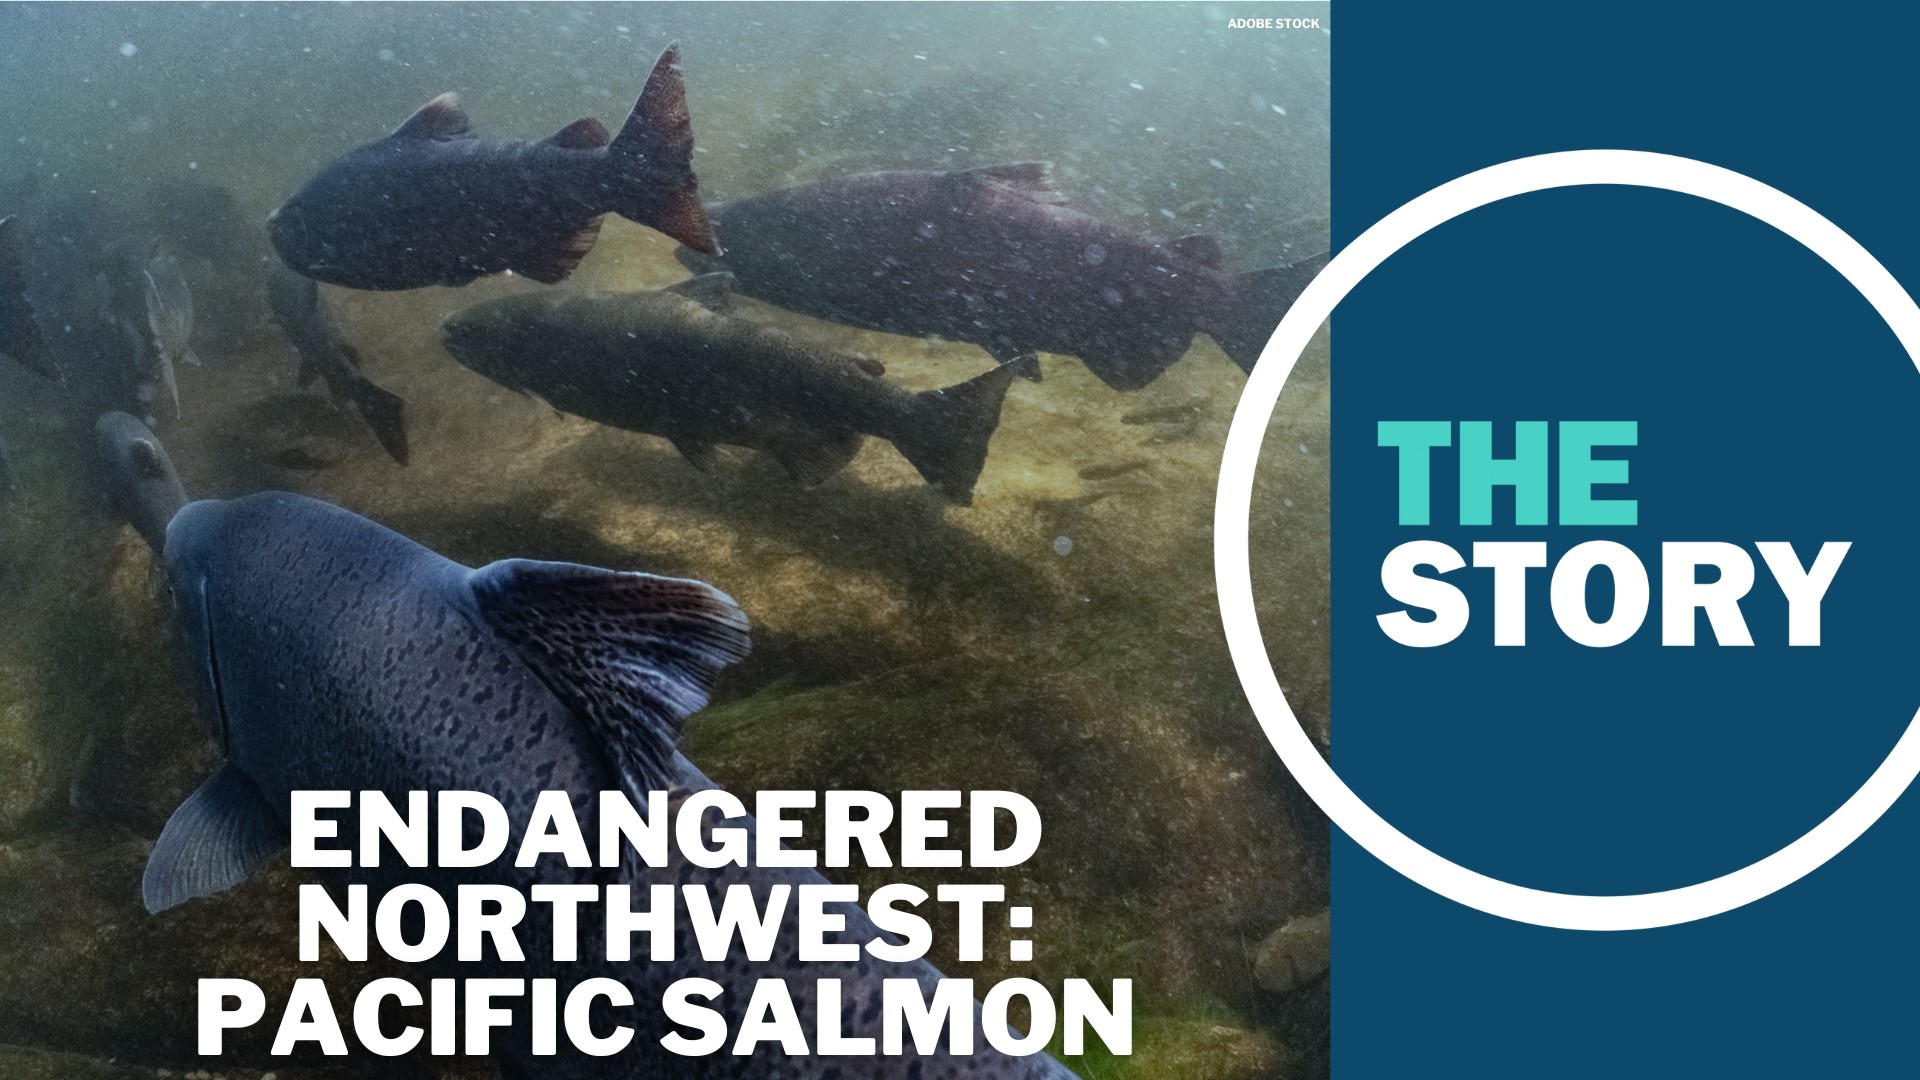 The salmon life cycle is complex, which means it can be impacted by any number of factors. Their decline in the Pacific Northwest isn't simple, but it is concerning.